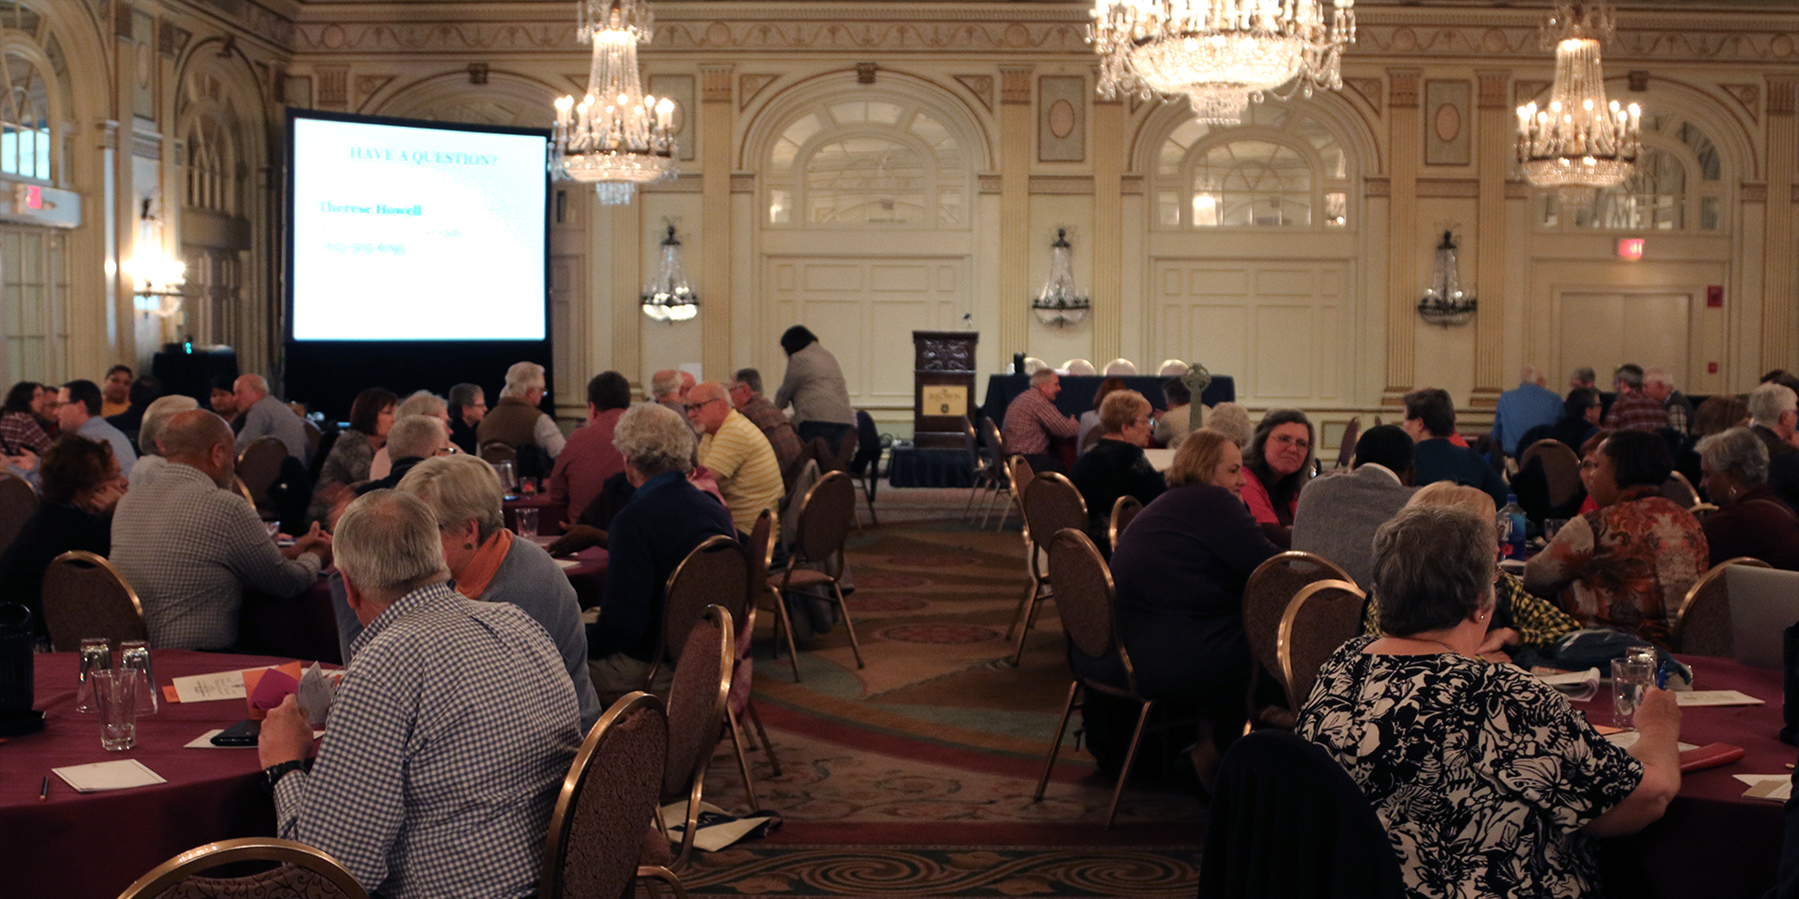 More than 100 moderators from across the country gathered in Louisville, Kentucky for the Moderators’ Conference. Photo by Rick Jones